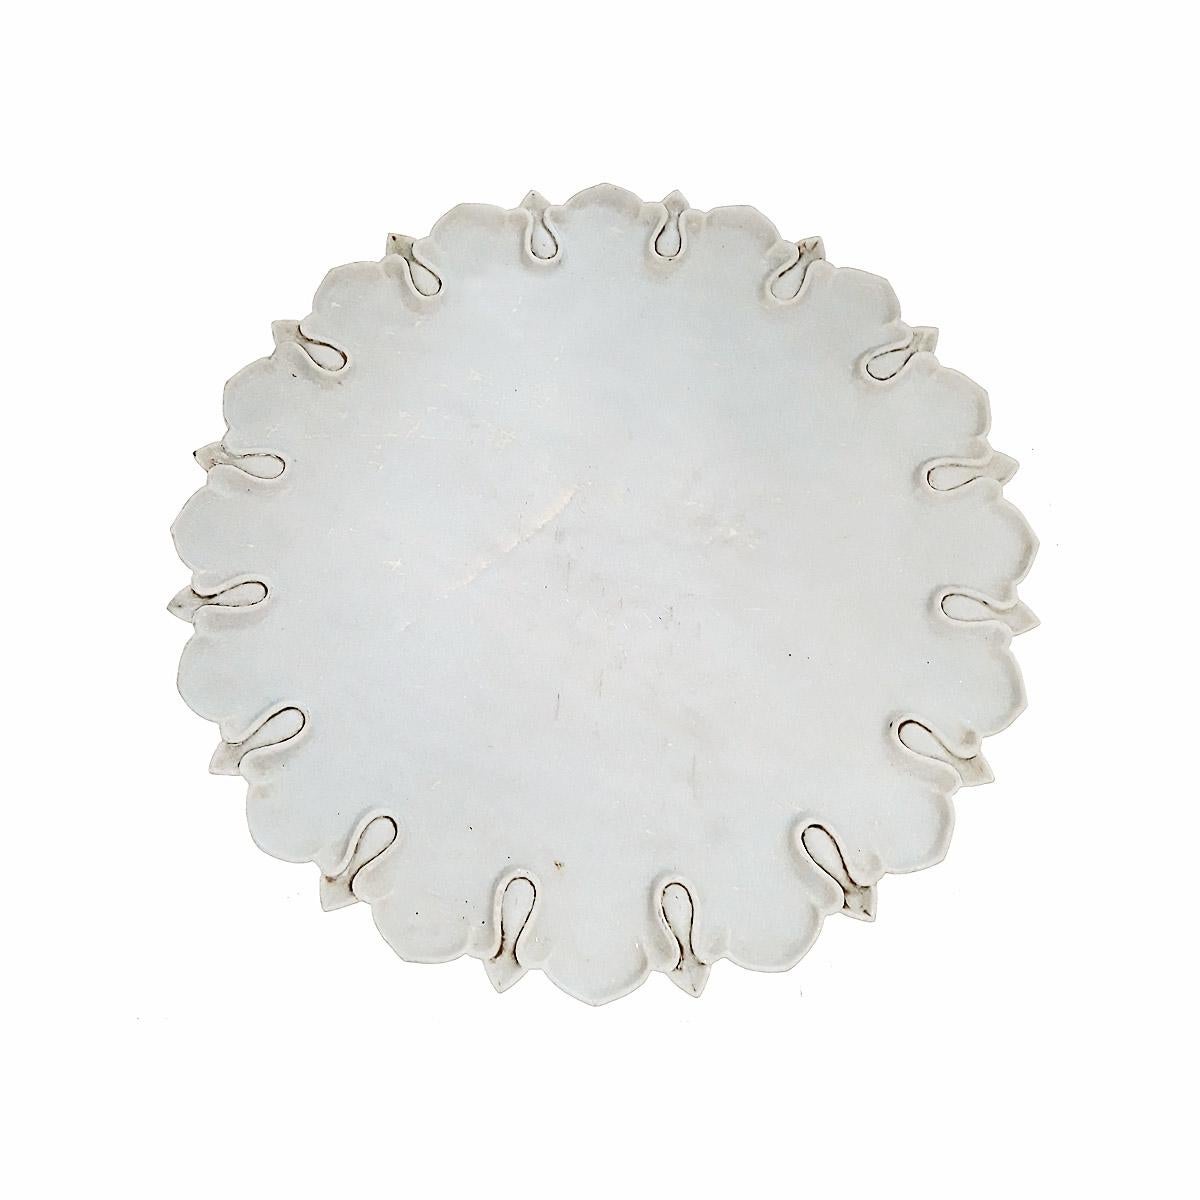 A hand-carved marble charger from India, 1960-1970. 18 inches in diameter, half an inch high. Can be used as a charger, centerpiece or serving tray.